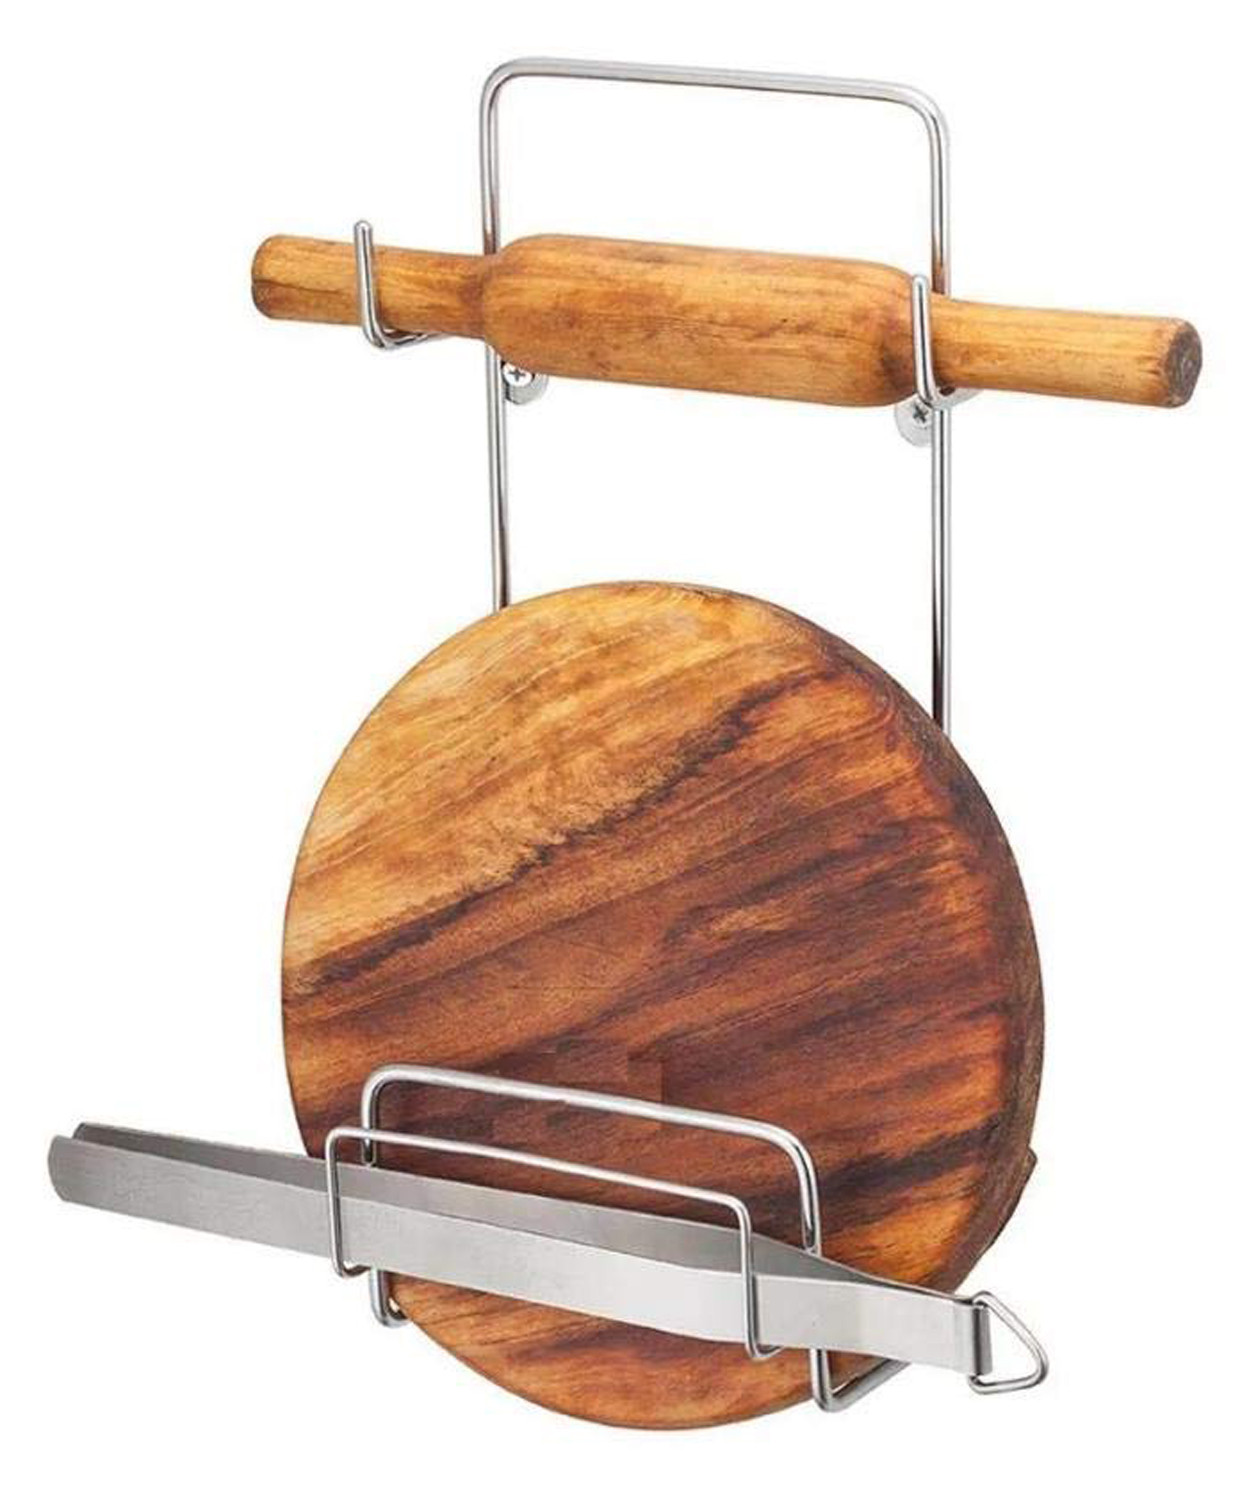 Kuber Industries Belan and Chakla Stand, Belan Tava Rolling Pin Holder, Heavyweight, Durable Chakla Holder for Kitchen (Silver)